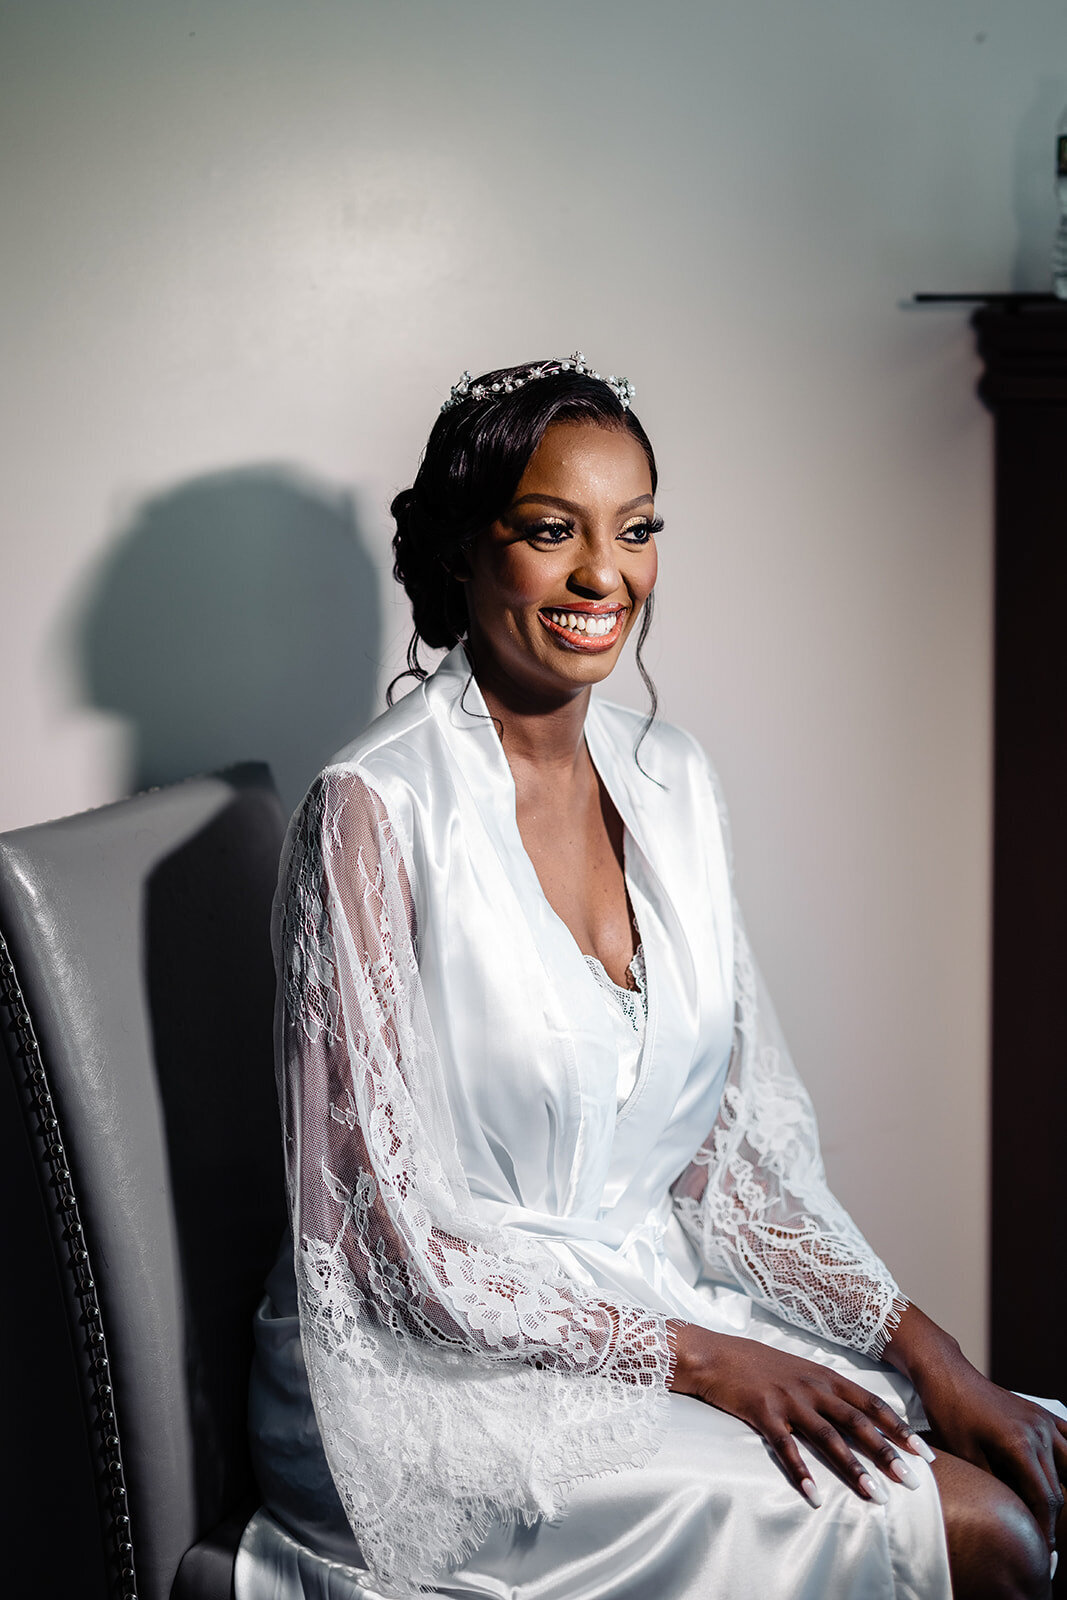 A radiant bride sitting in a well-lit room, smiling gently, wearing a white dressing gown with lace detailing and a delicate tiara, exuding happiness and elegance before the wedding ceremony.